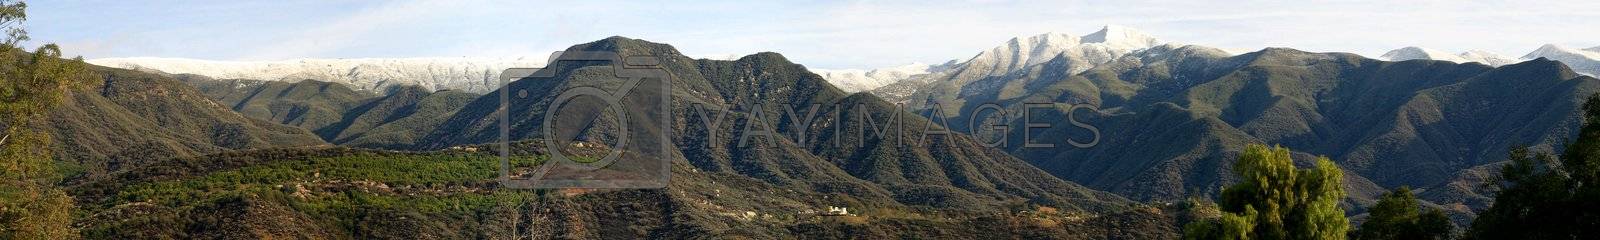 Royalty free image of Ojai Valley With Snow (P2) by hlehnerer